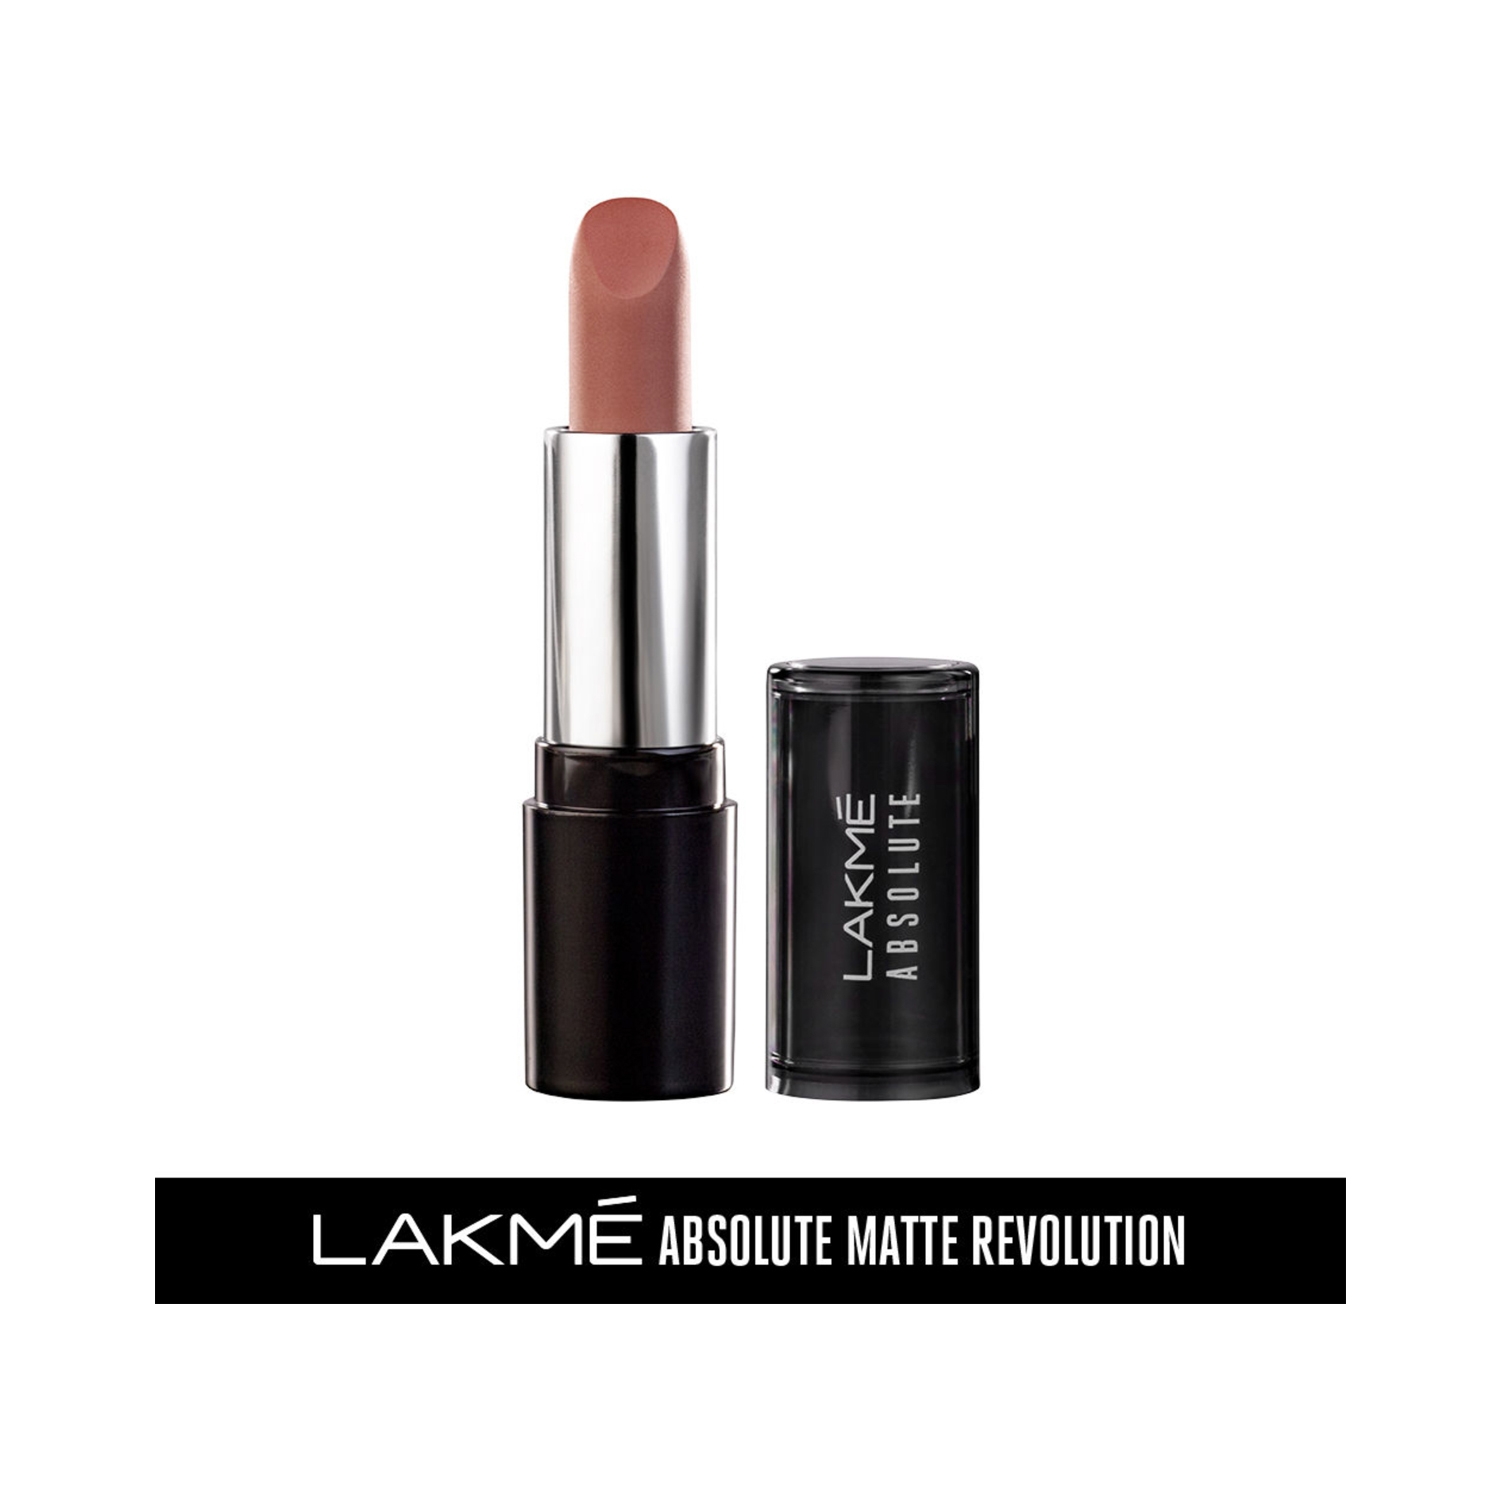 Lakme Absolute Matte Revolution Lip Color - 301 Morning Coffee (3.5g)